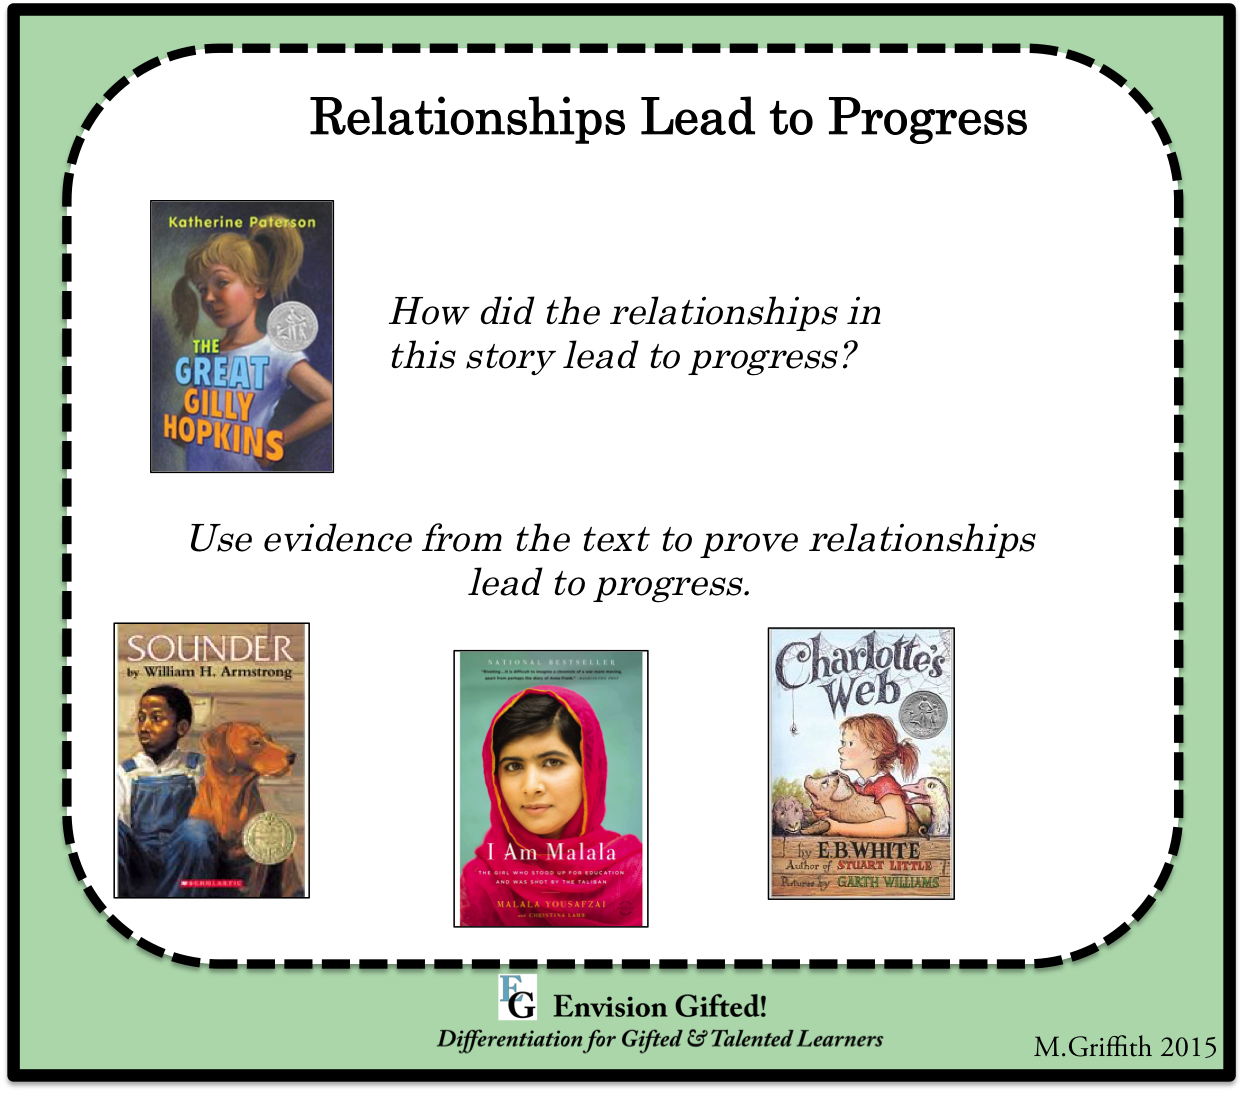 Envision Gifted. Universal Theme Relationships Lead To Progress